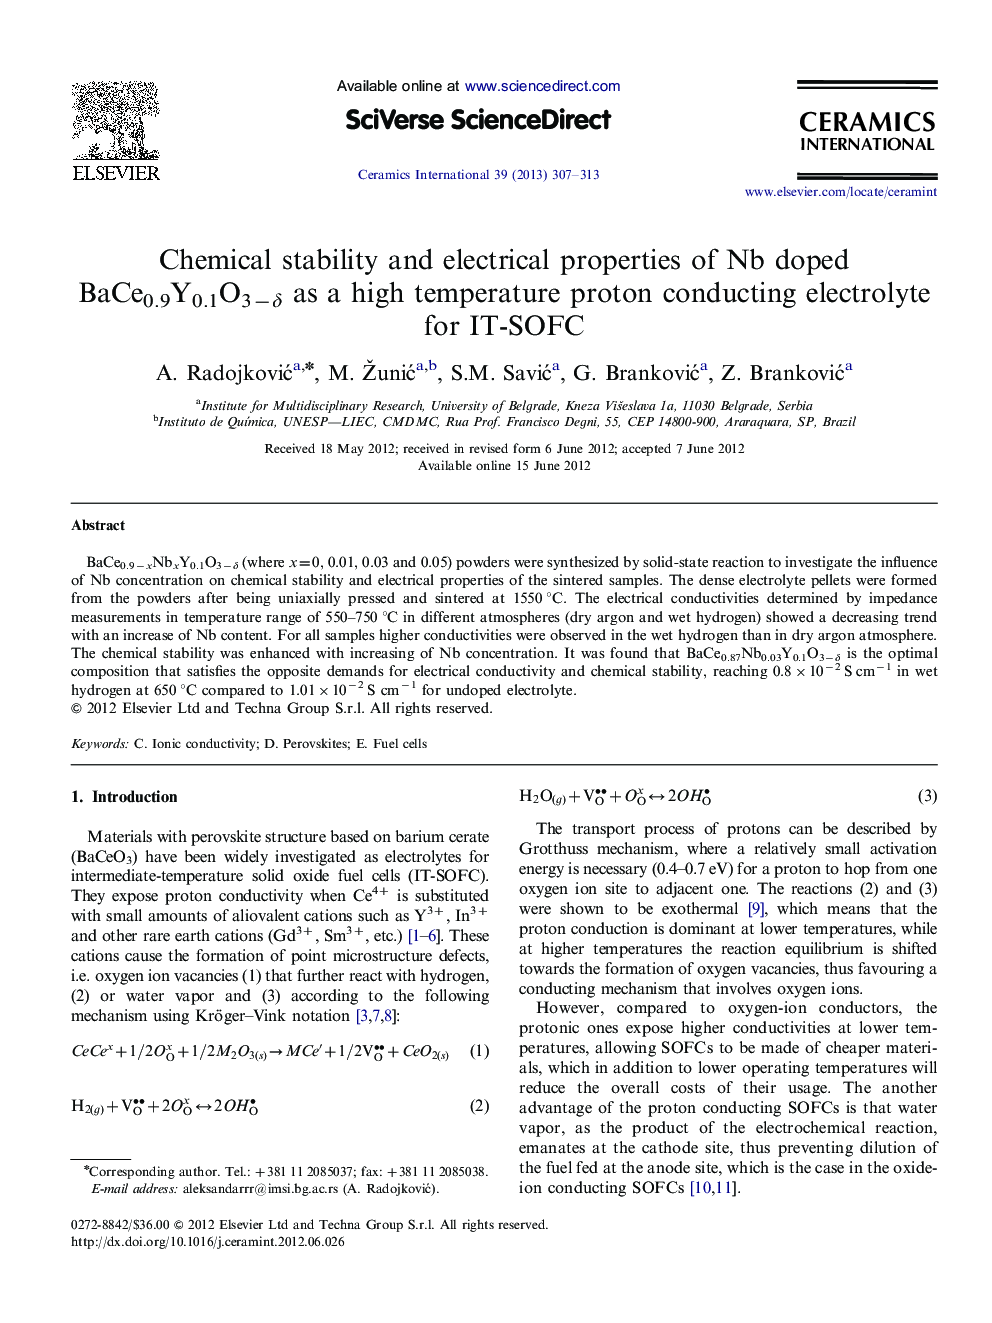 Chemical stability and electrical properties of Nb doped BaCe0.9Y0.1O3−δ as a high temperature proton conducting electrolyte for IT-SOFC